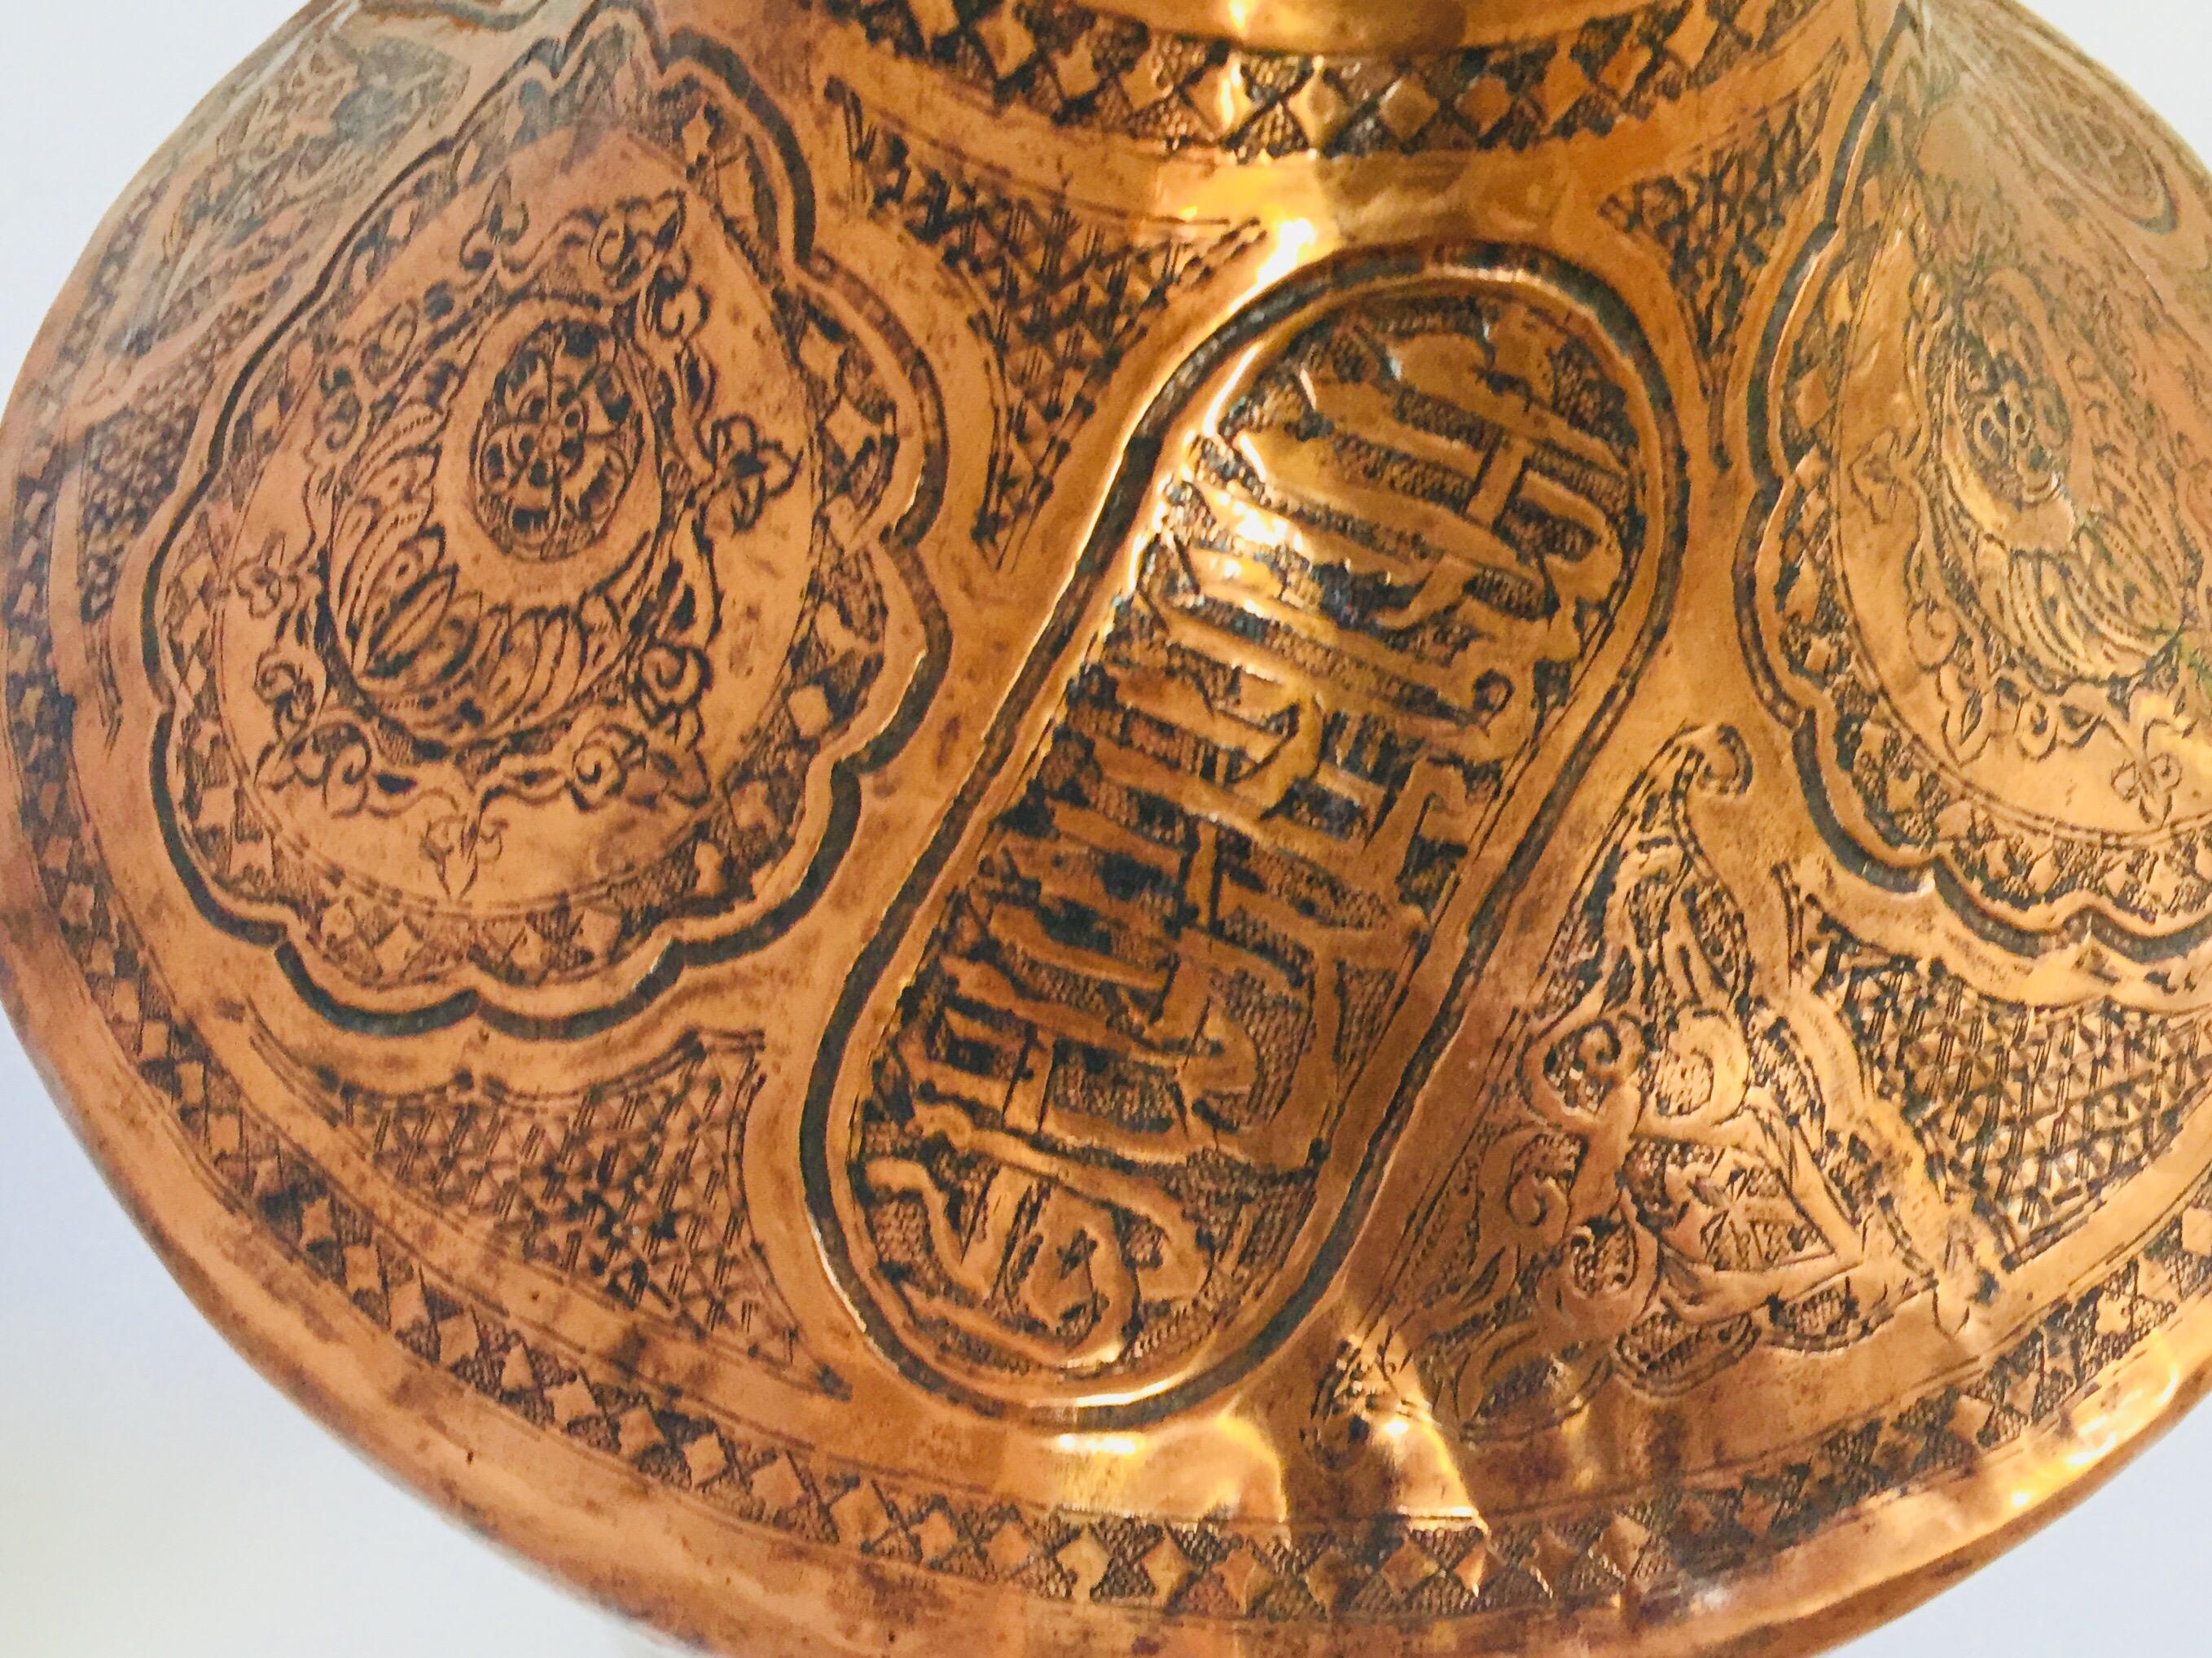 Middle Eastern Syrian Copper Islamic Art Vase Engraved with Arabic Calligraphy 8